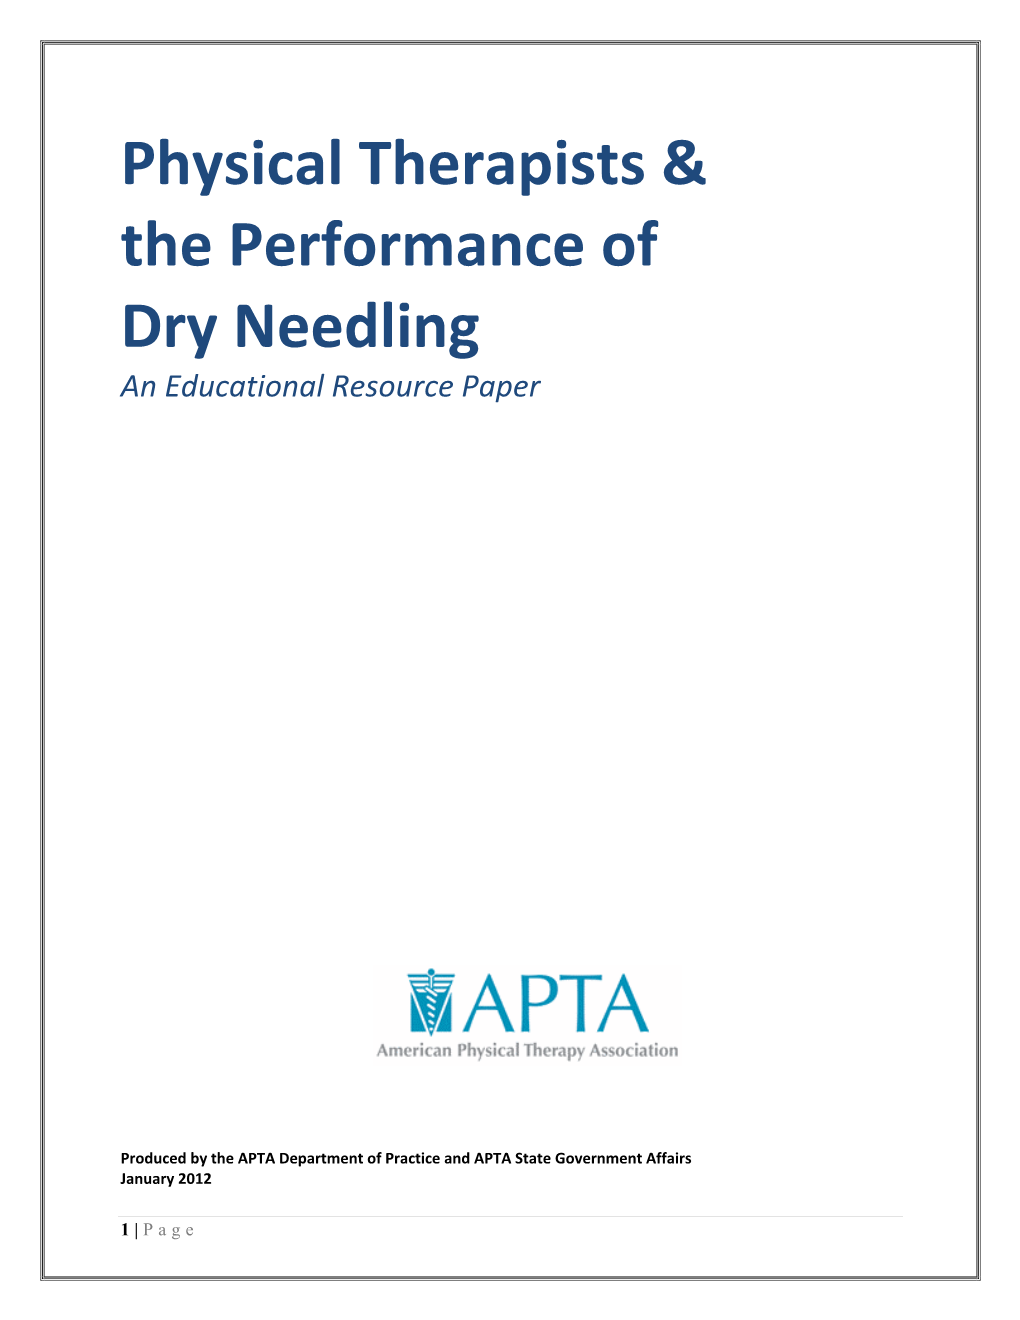 APTA Physical Therapists & the Performance of Dry Needling